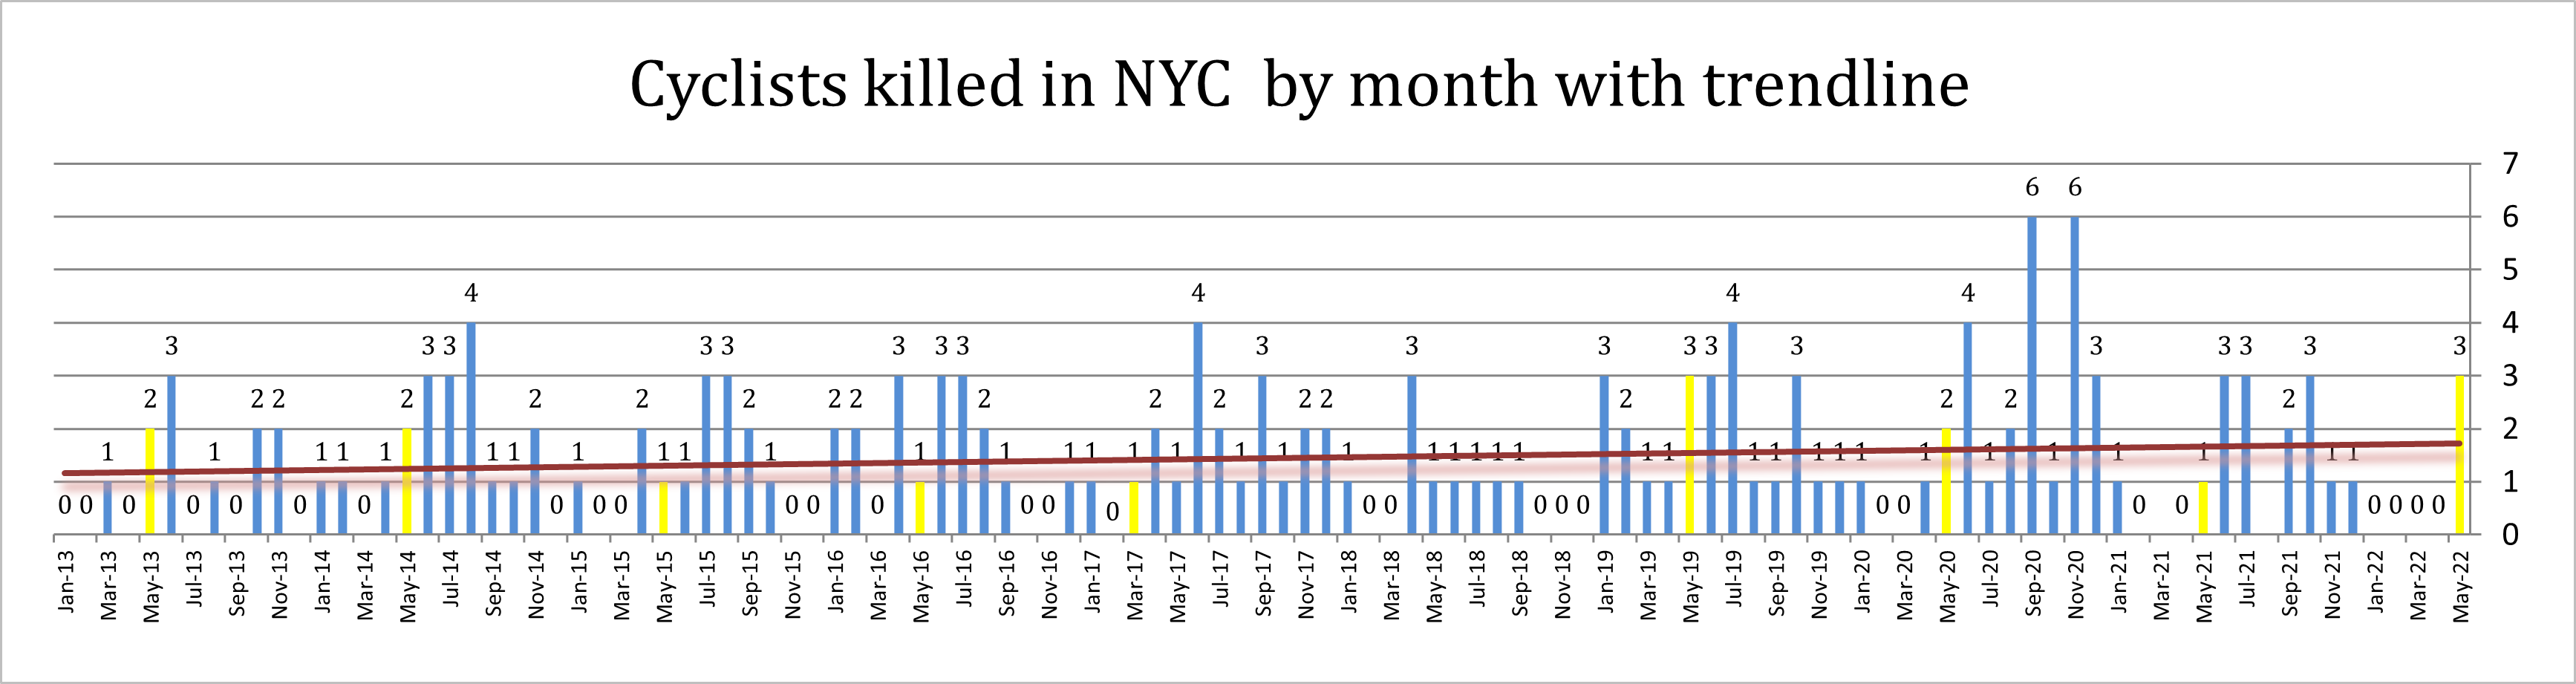 Cyclist Killed in NYC by Month With Trendline